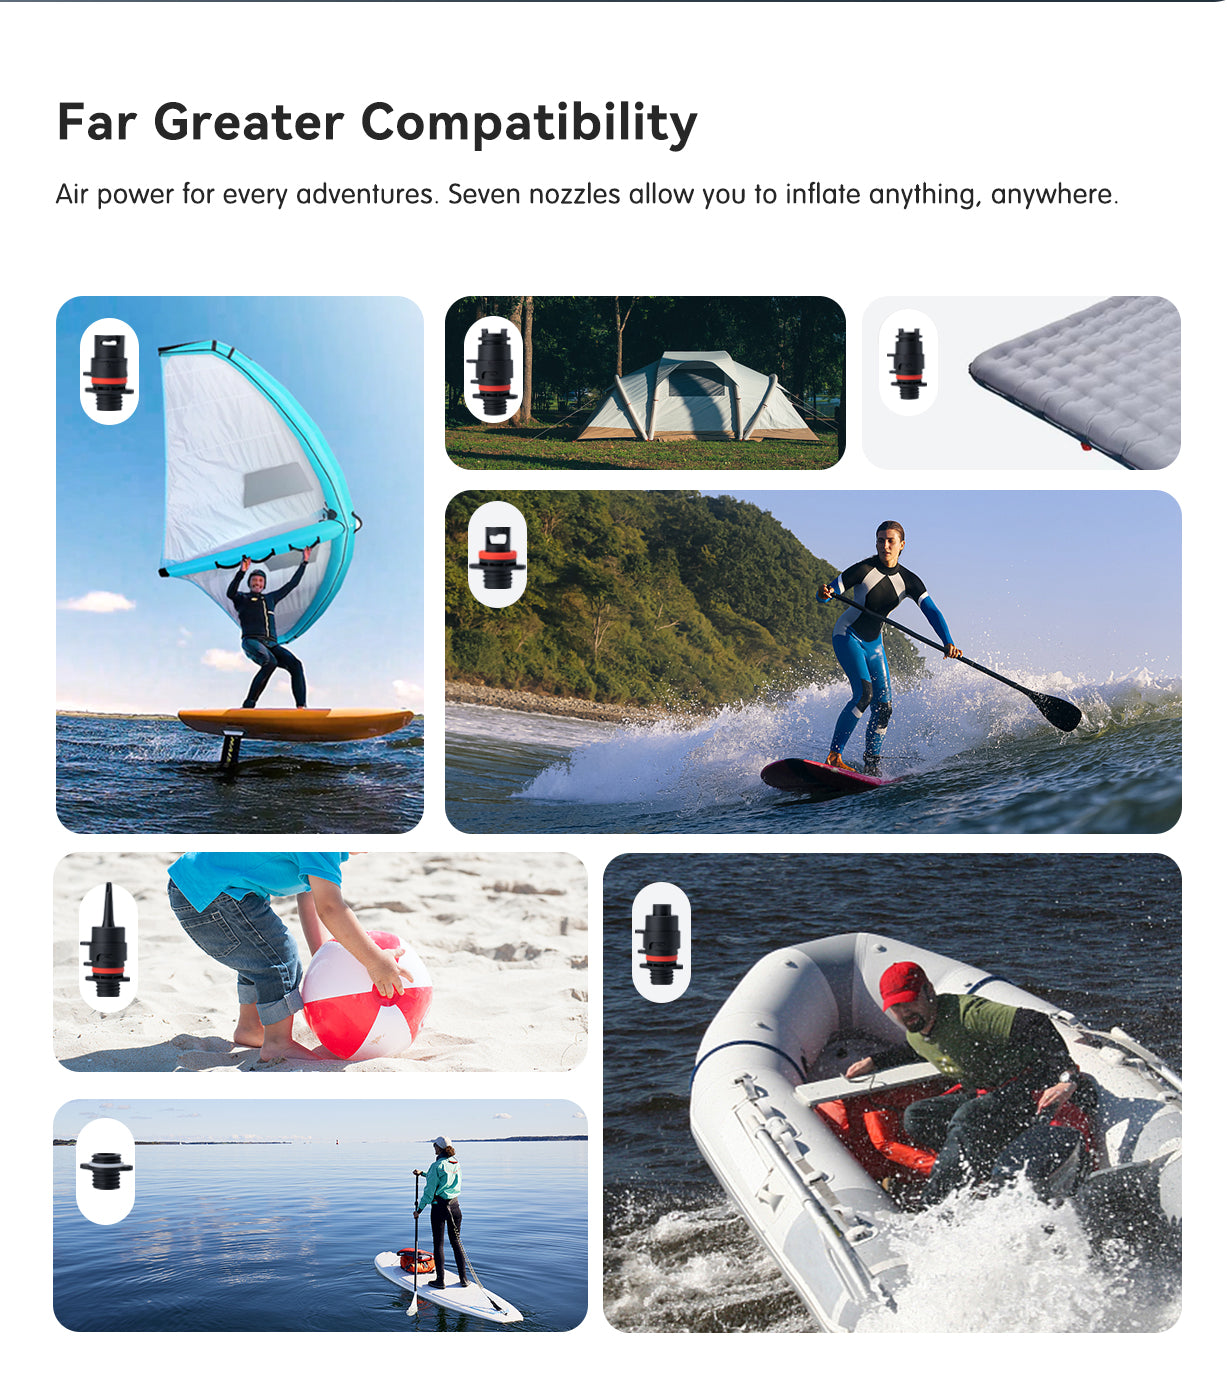 Far greater compatibility: Air power for every adventures. Seven nozzles allow you to inflate anything, anywhere. ①: SUP/Kayak/Inflatable Dinghy ⑦: C7/D7 ①+②: Inflatable Wings and Kites ①+②+③: Swim Ring/Float Raft/Inflatable Pool/Yoga Ball ①+②+④: Inflatable Boat/Mattress/Tent ①+②+⑤: Decathlon Self-Inflating Camping Mattress ①+②+⑥: 34mm diameter double-sided air valve